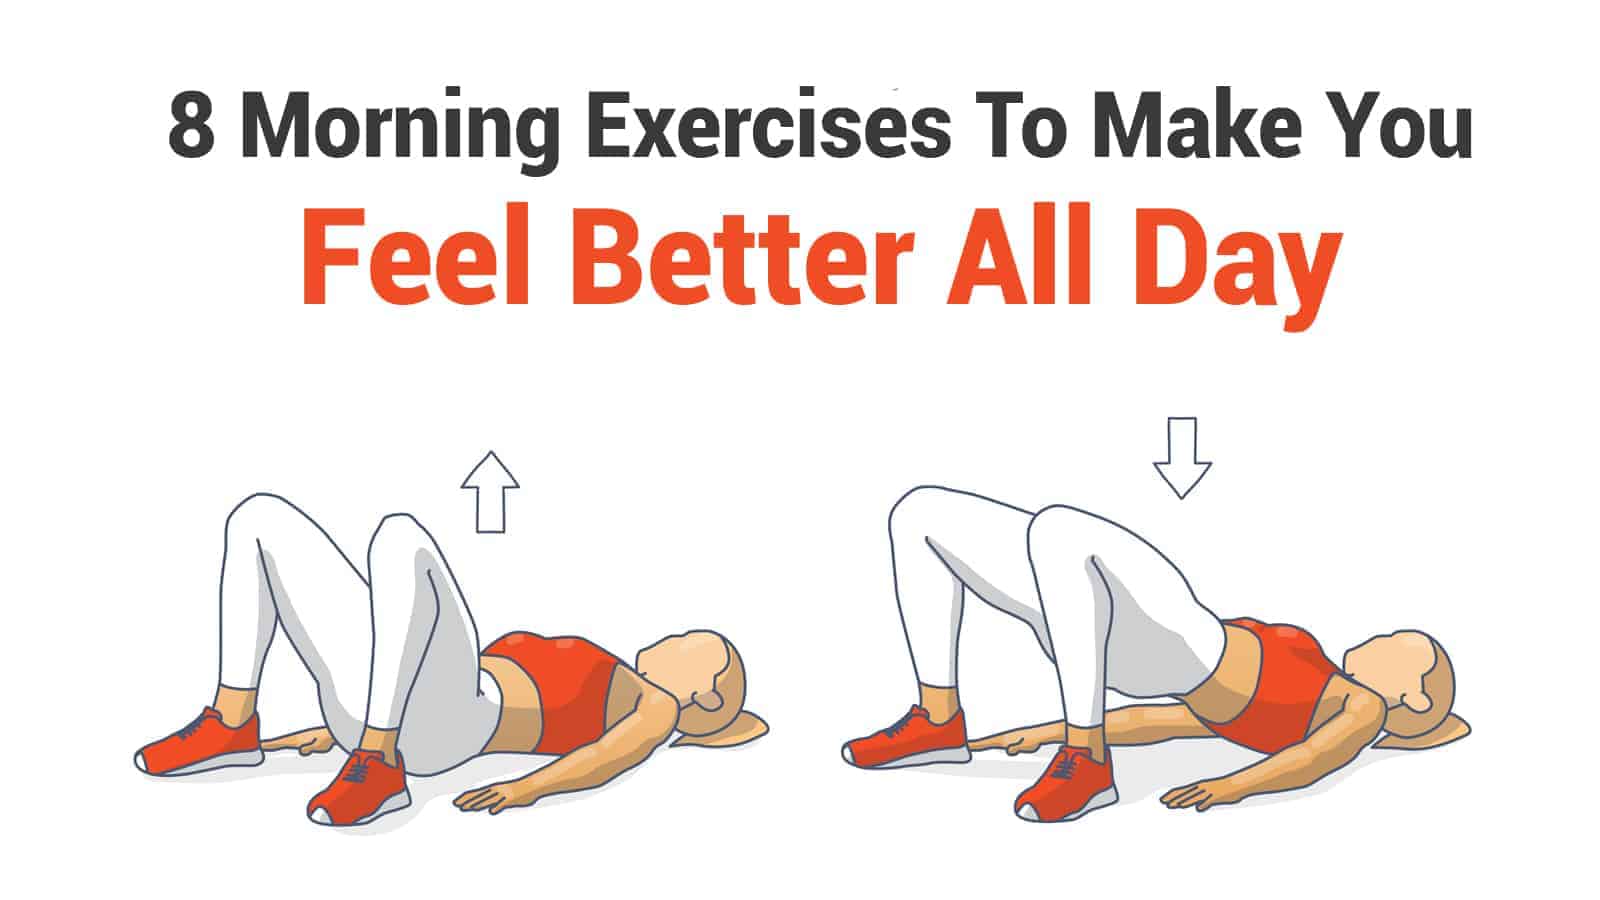 8 Morning Exercises To Make You Feel Better All Day